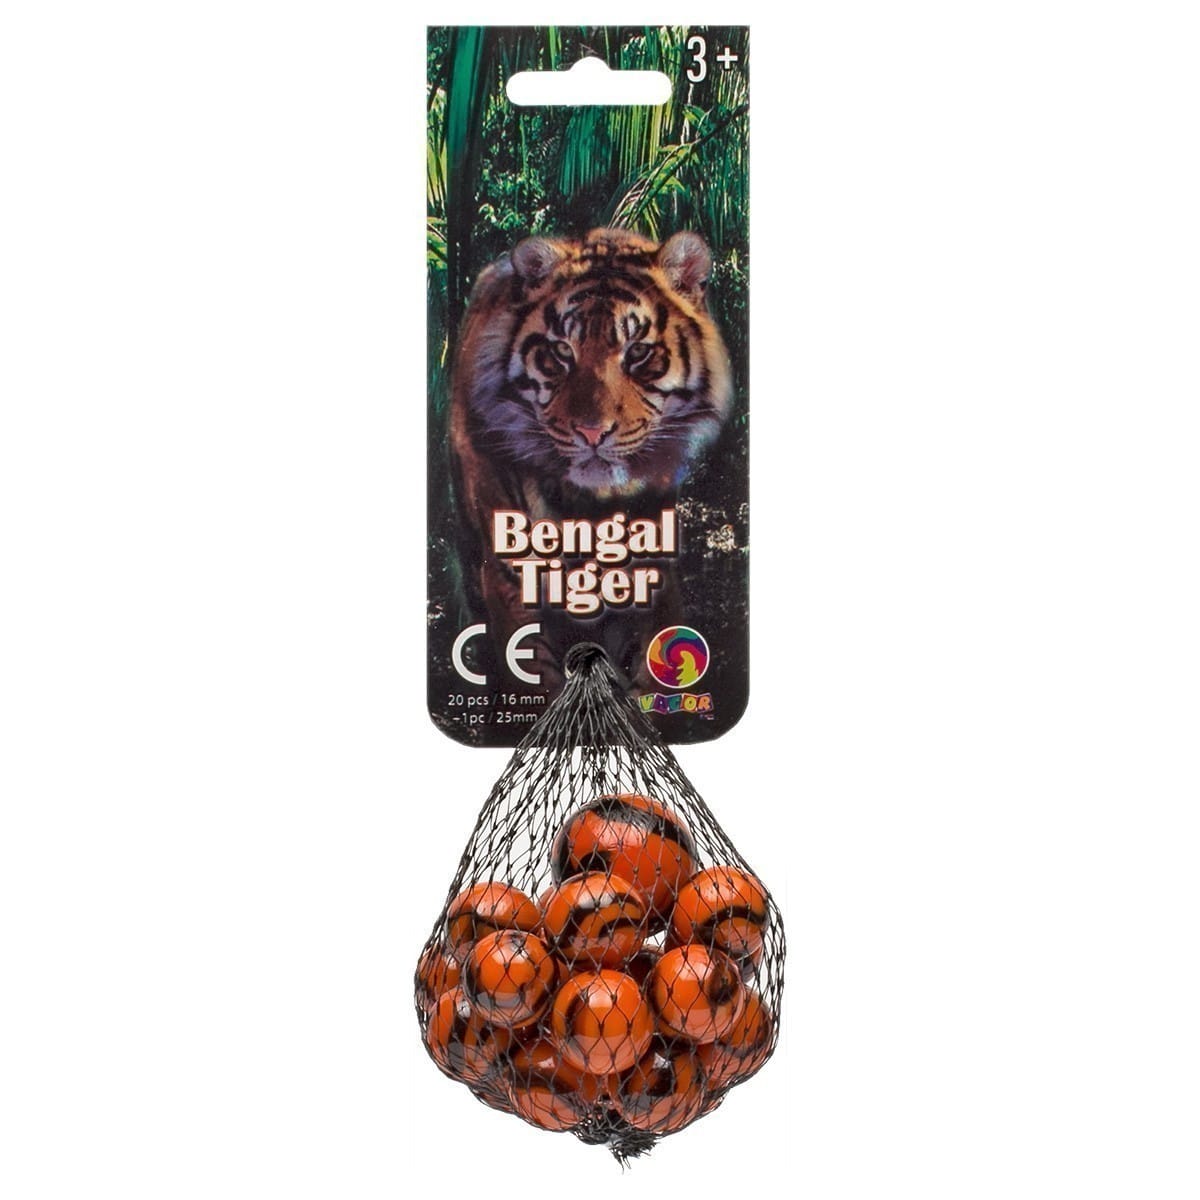 Vacor 16mm Glass Marbles - Animal KIngdom Collection - Bengal Tiger